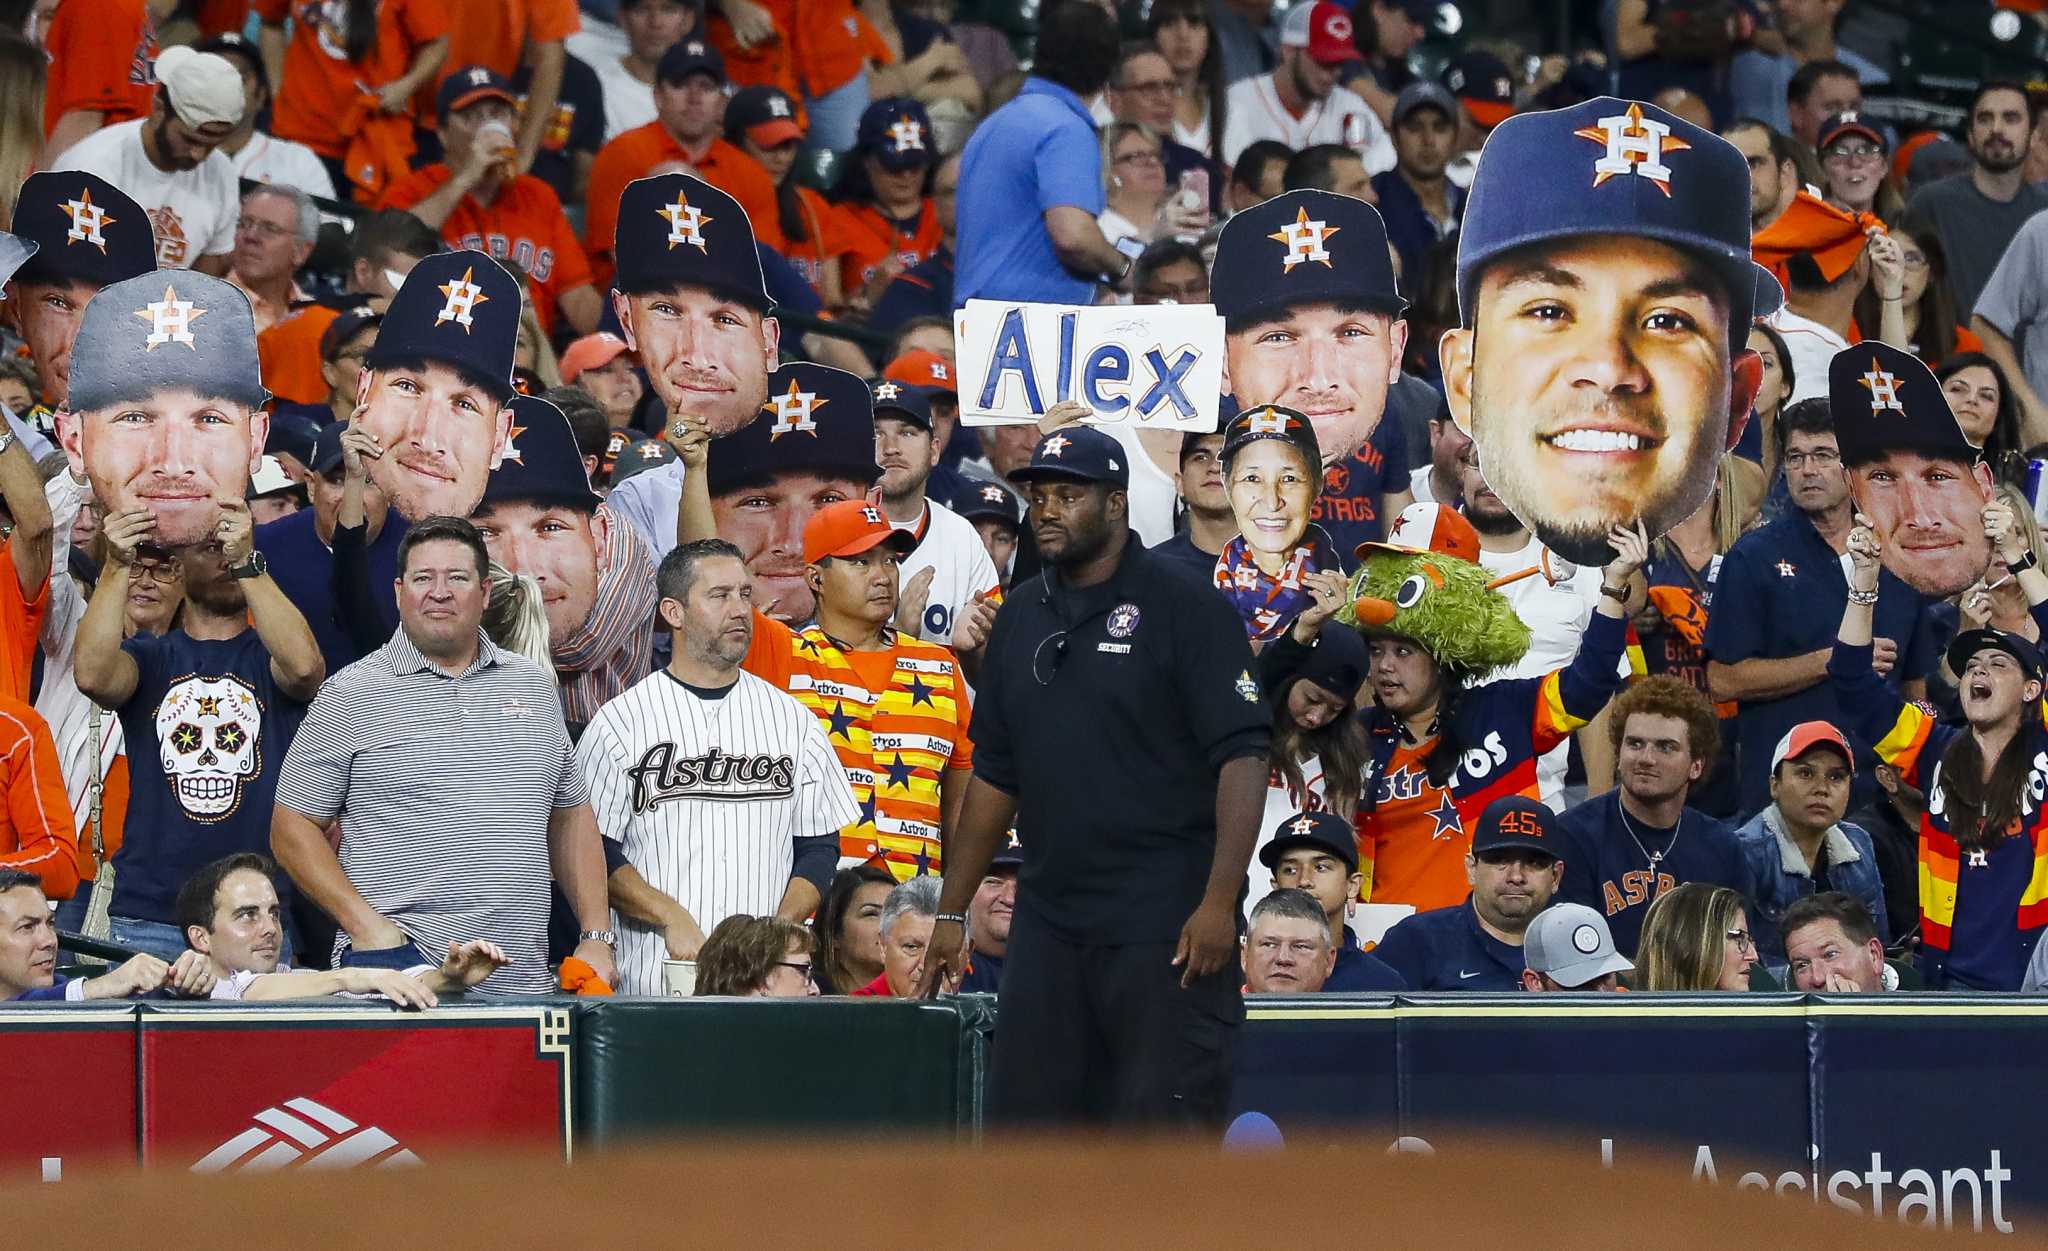 Fans try to rally Astros in Game 5 of ALCS